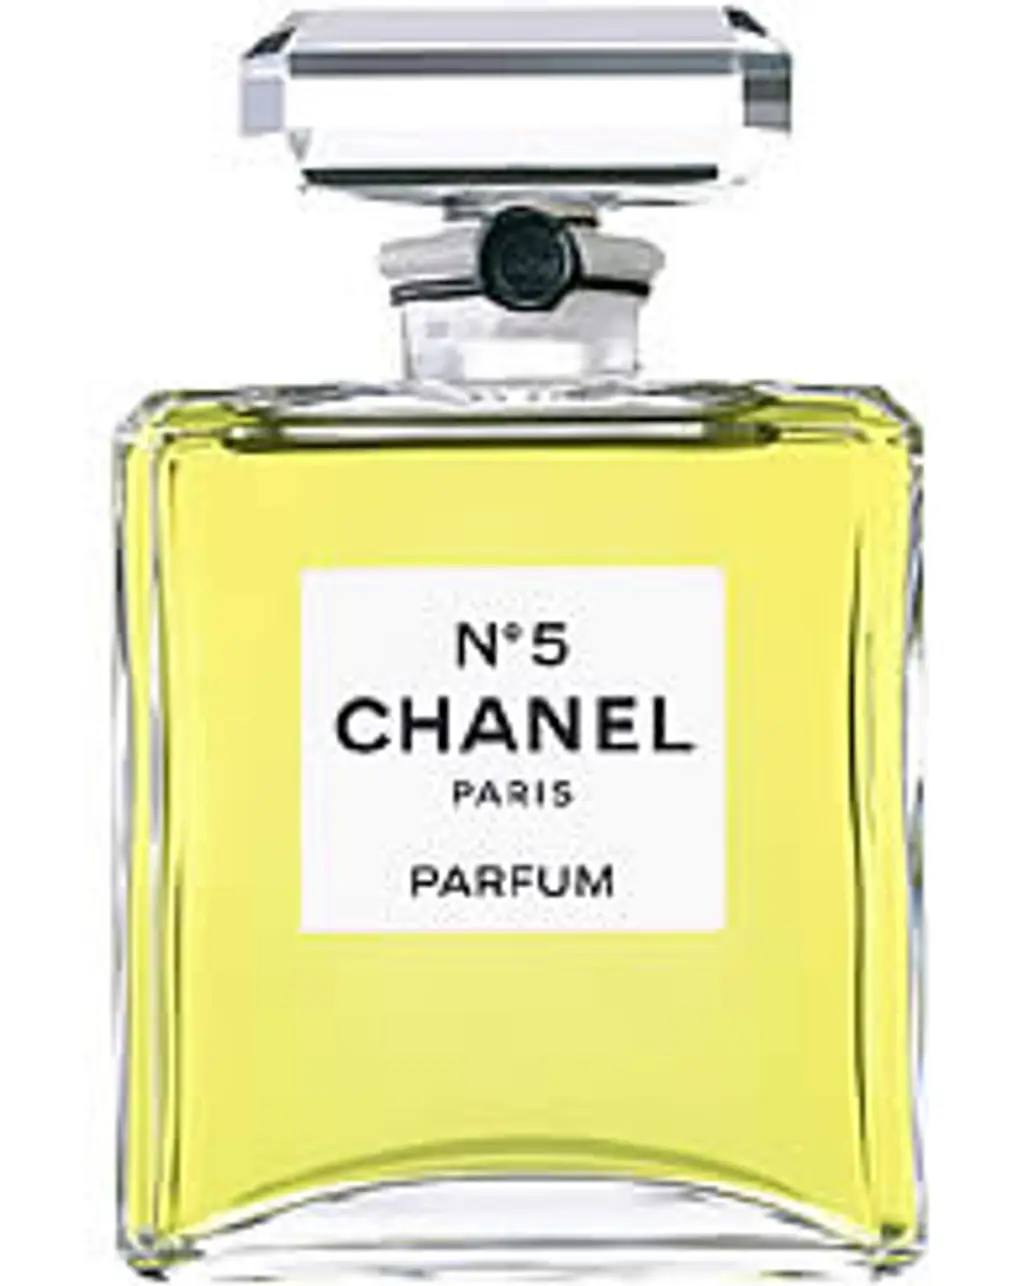 Chanel No. 5 by Chanel